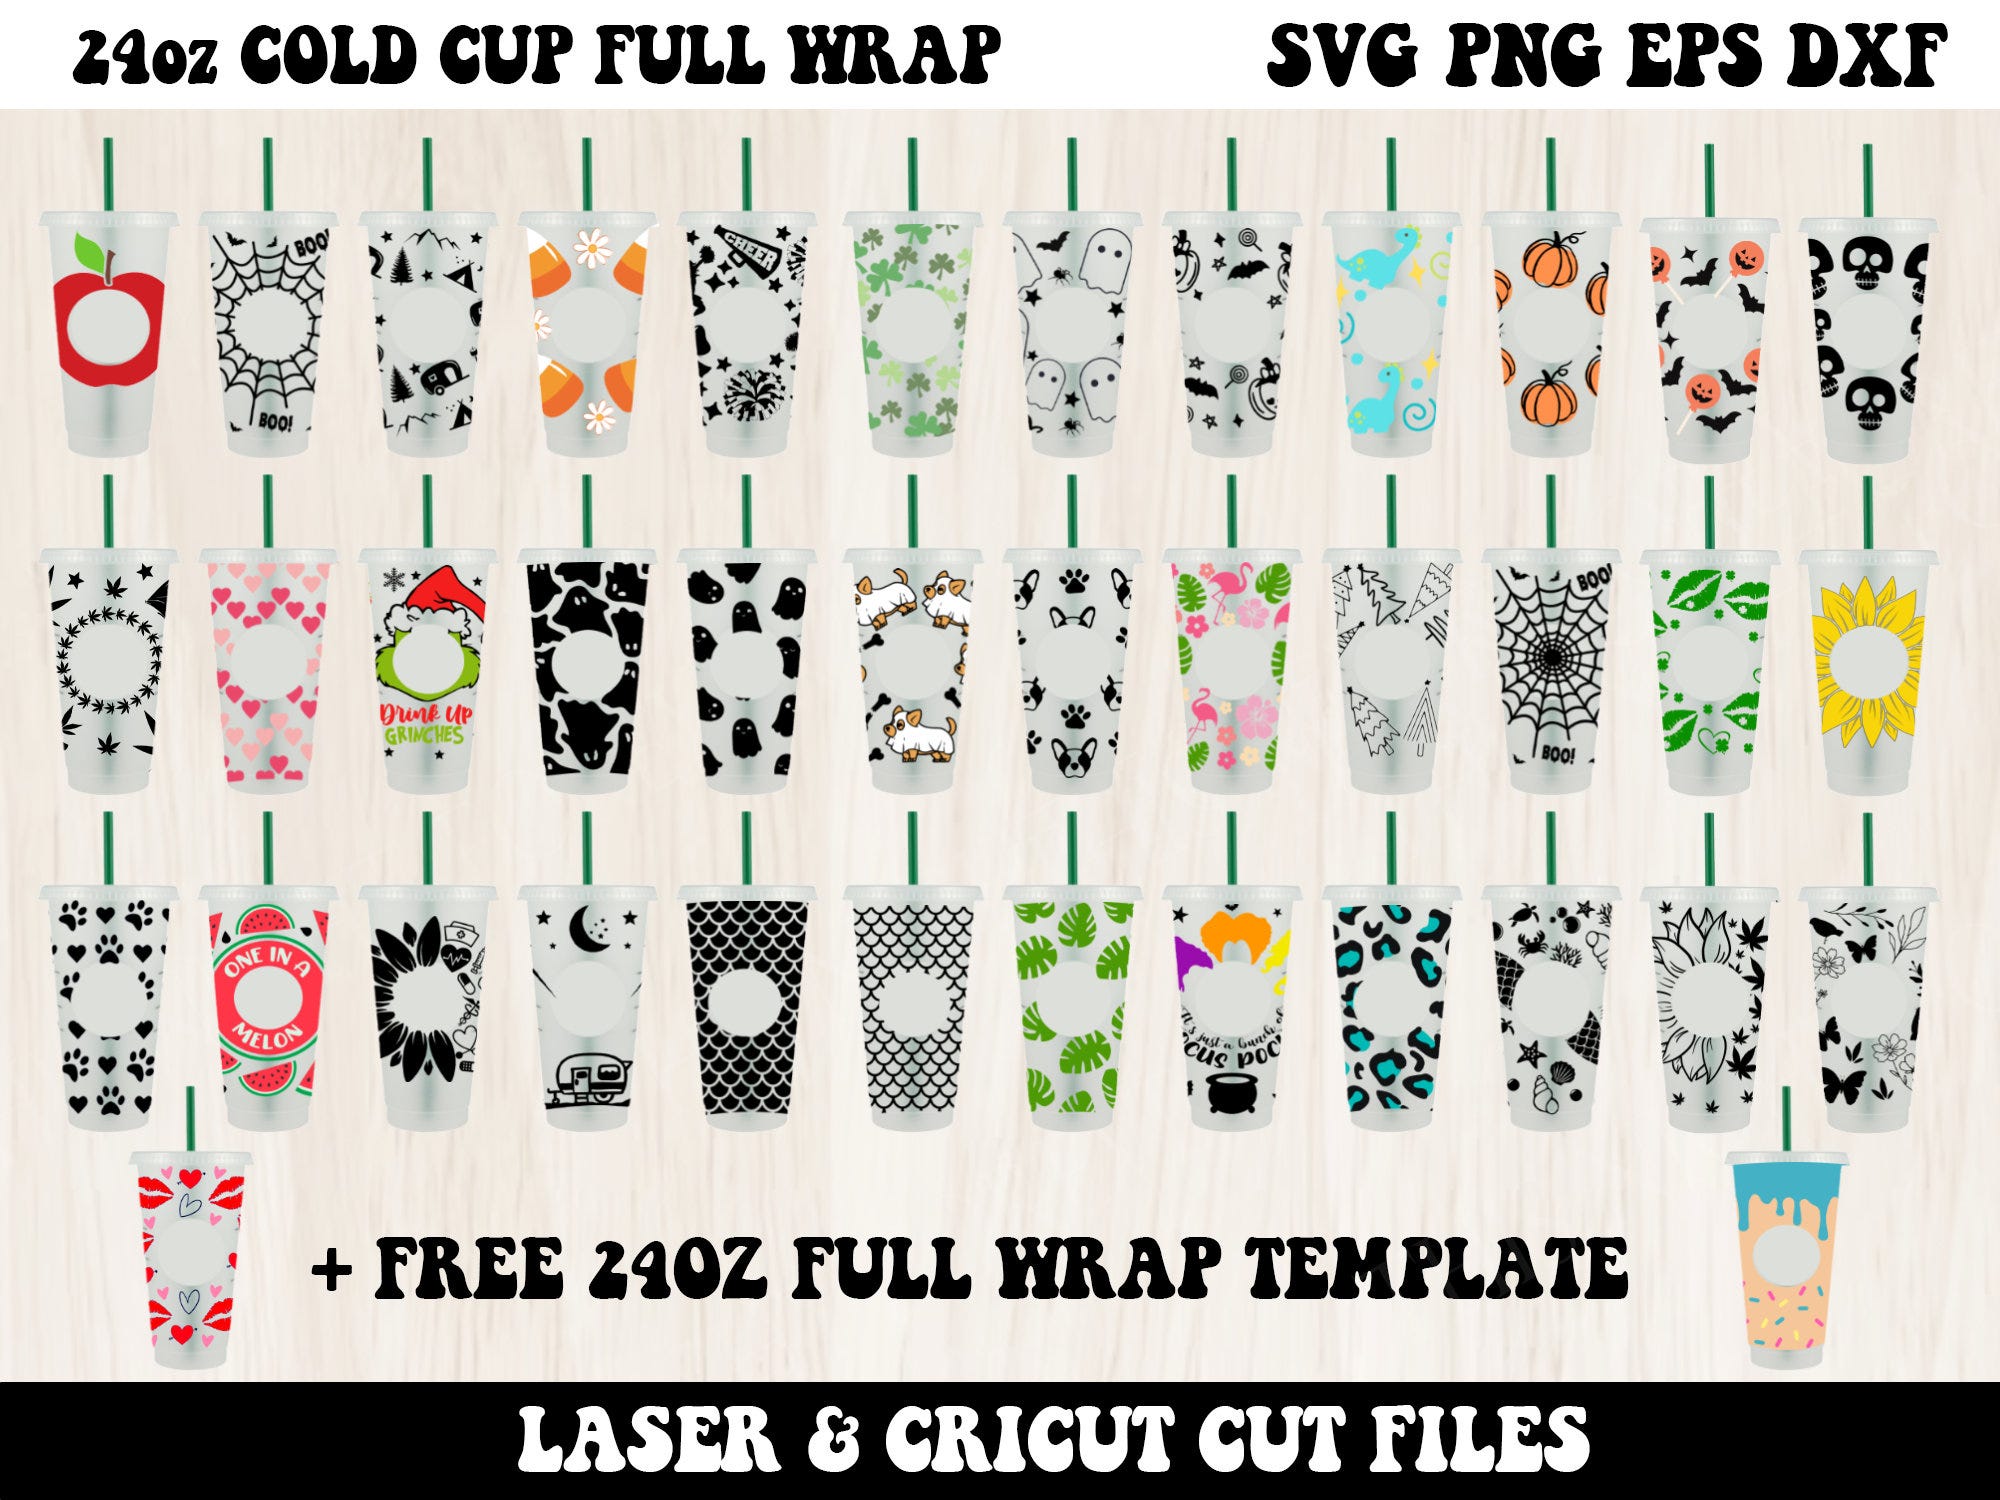 24oz Cold Cup Svg, 24oz Venti Cold Cup Svg, Cold Cup Svg, Full Wrap Svg, Svg Files for Cricut, Full Wrap Template Svg, Coffee Cup Svg